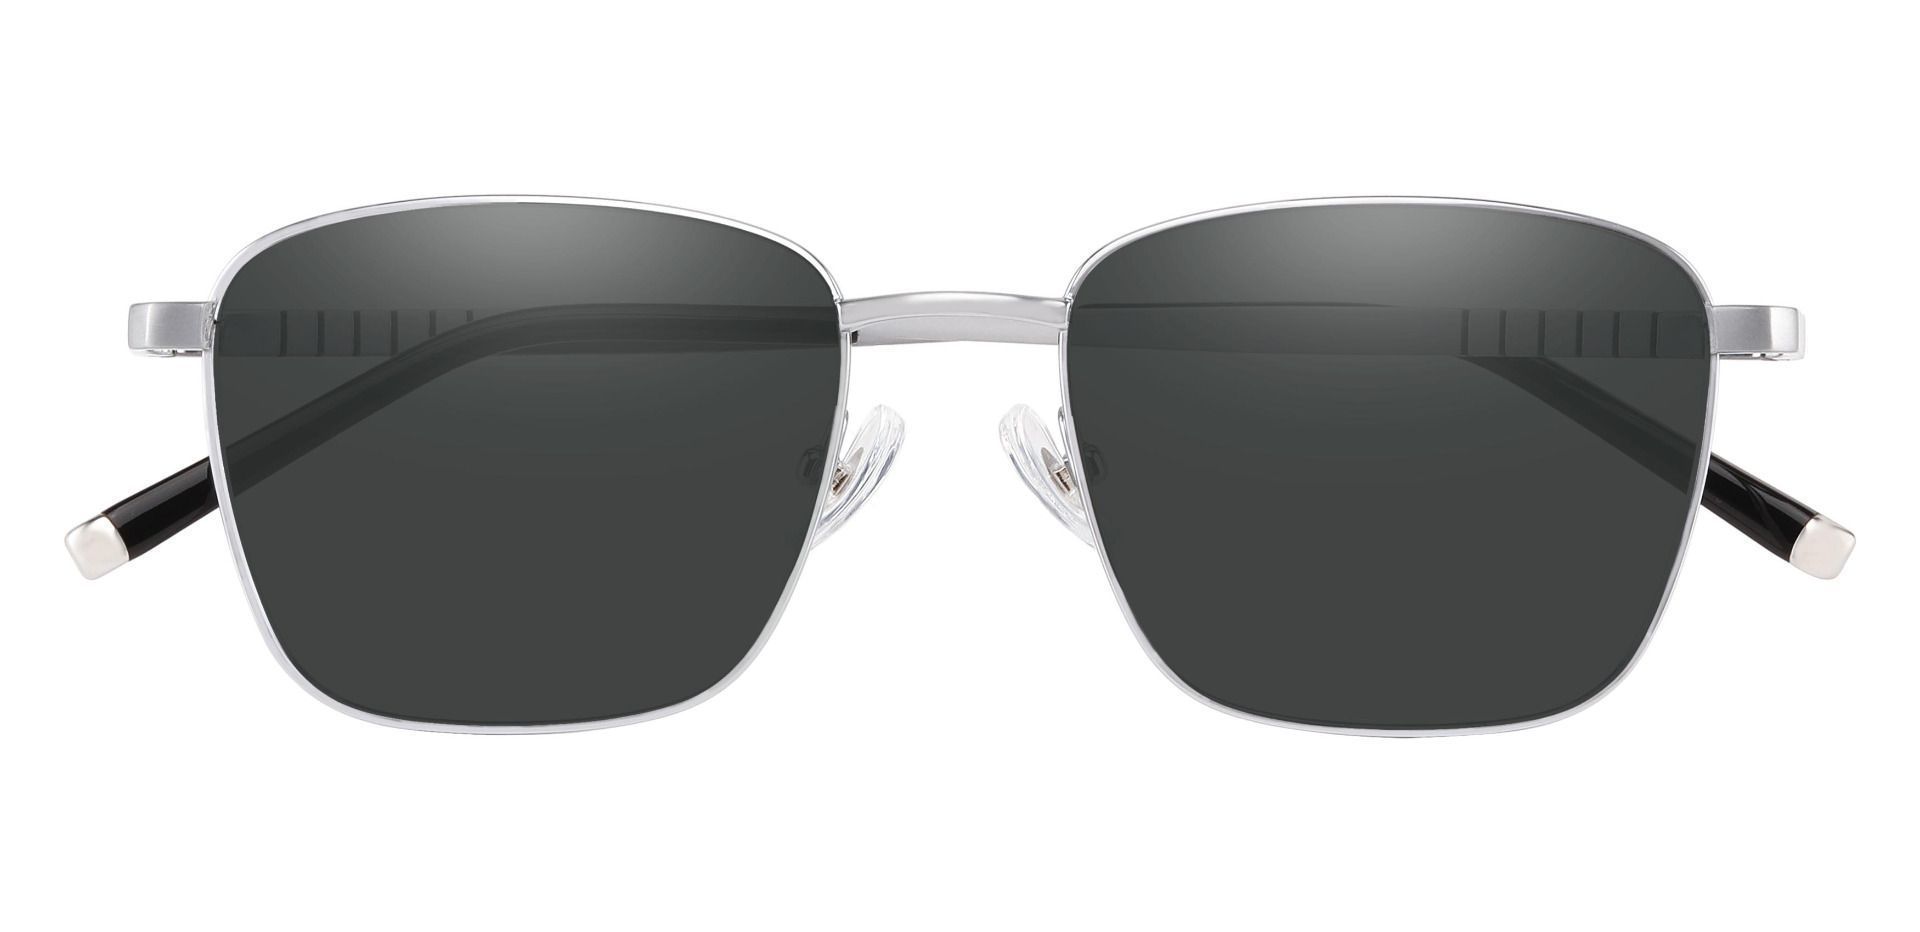 May Square Reading Sunglasses - Silver Frame With Gray Lenses